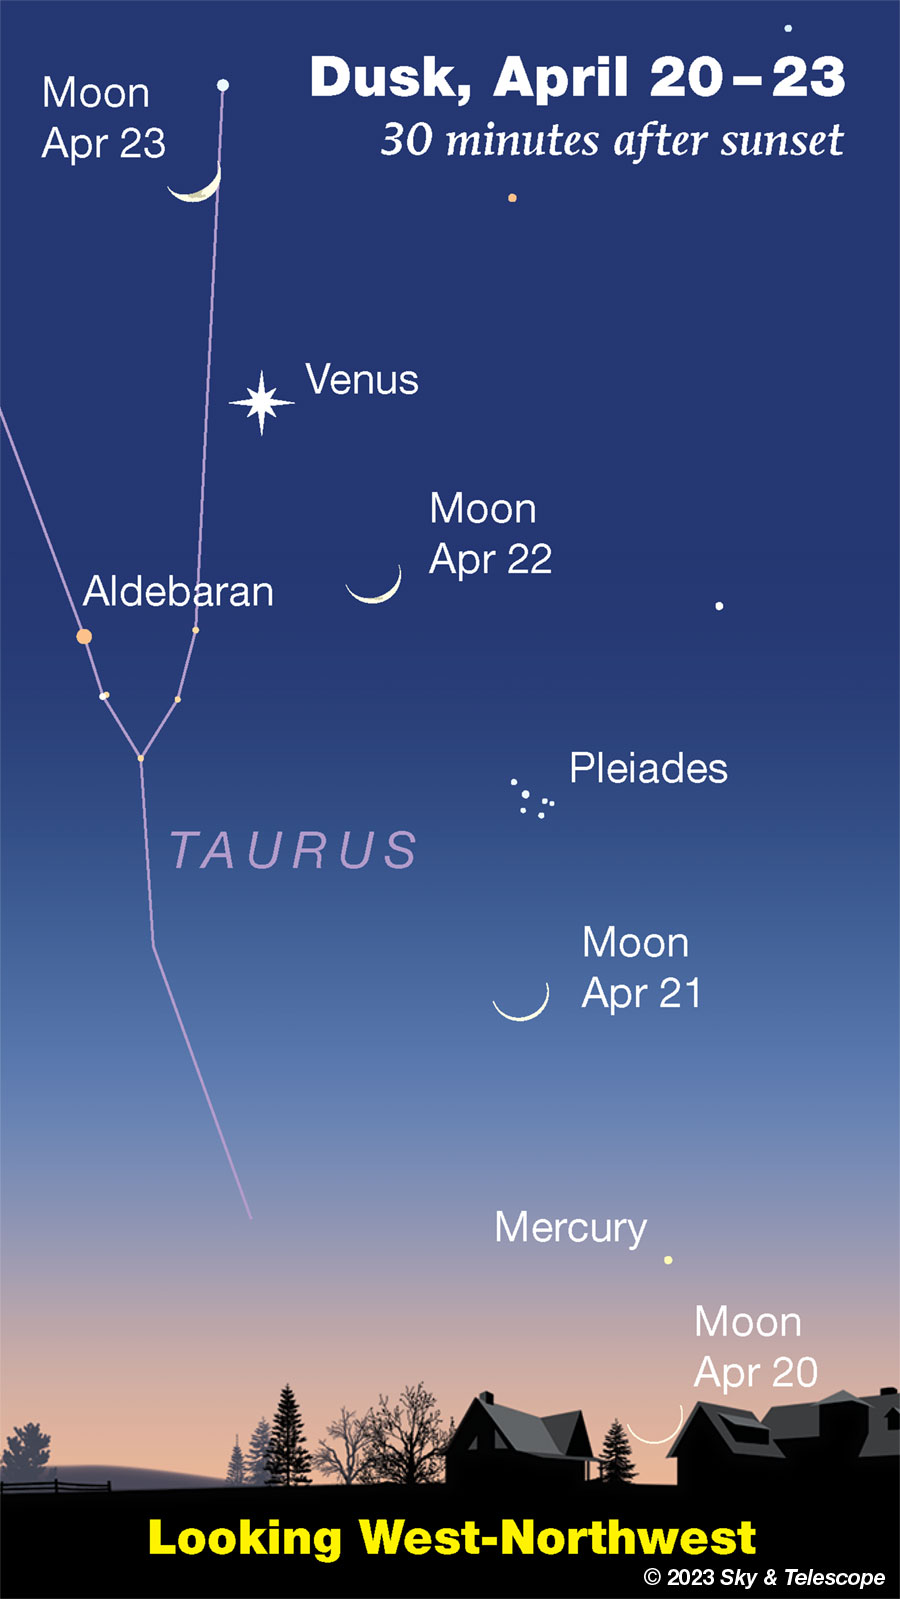 The waxing crescent Moon passing the Pleiades and then Venus, April 21-23, 2023